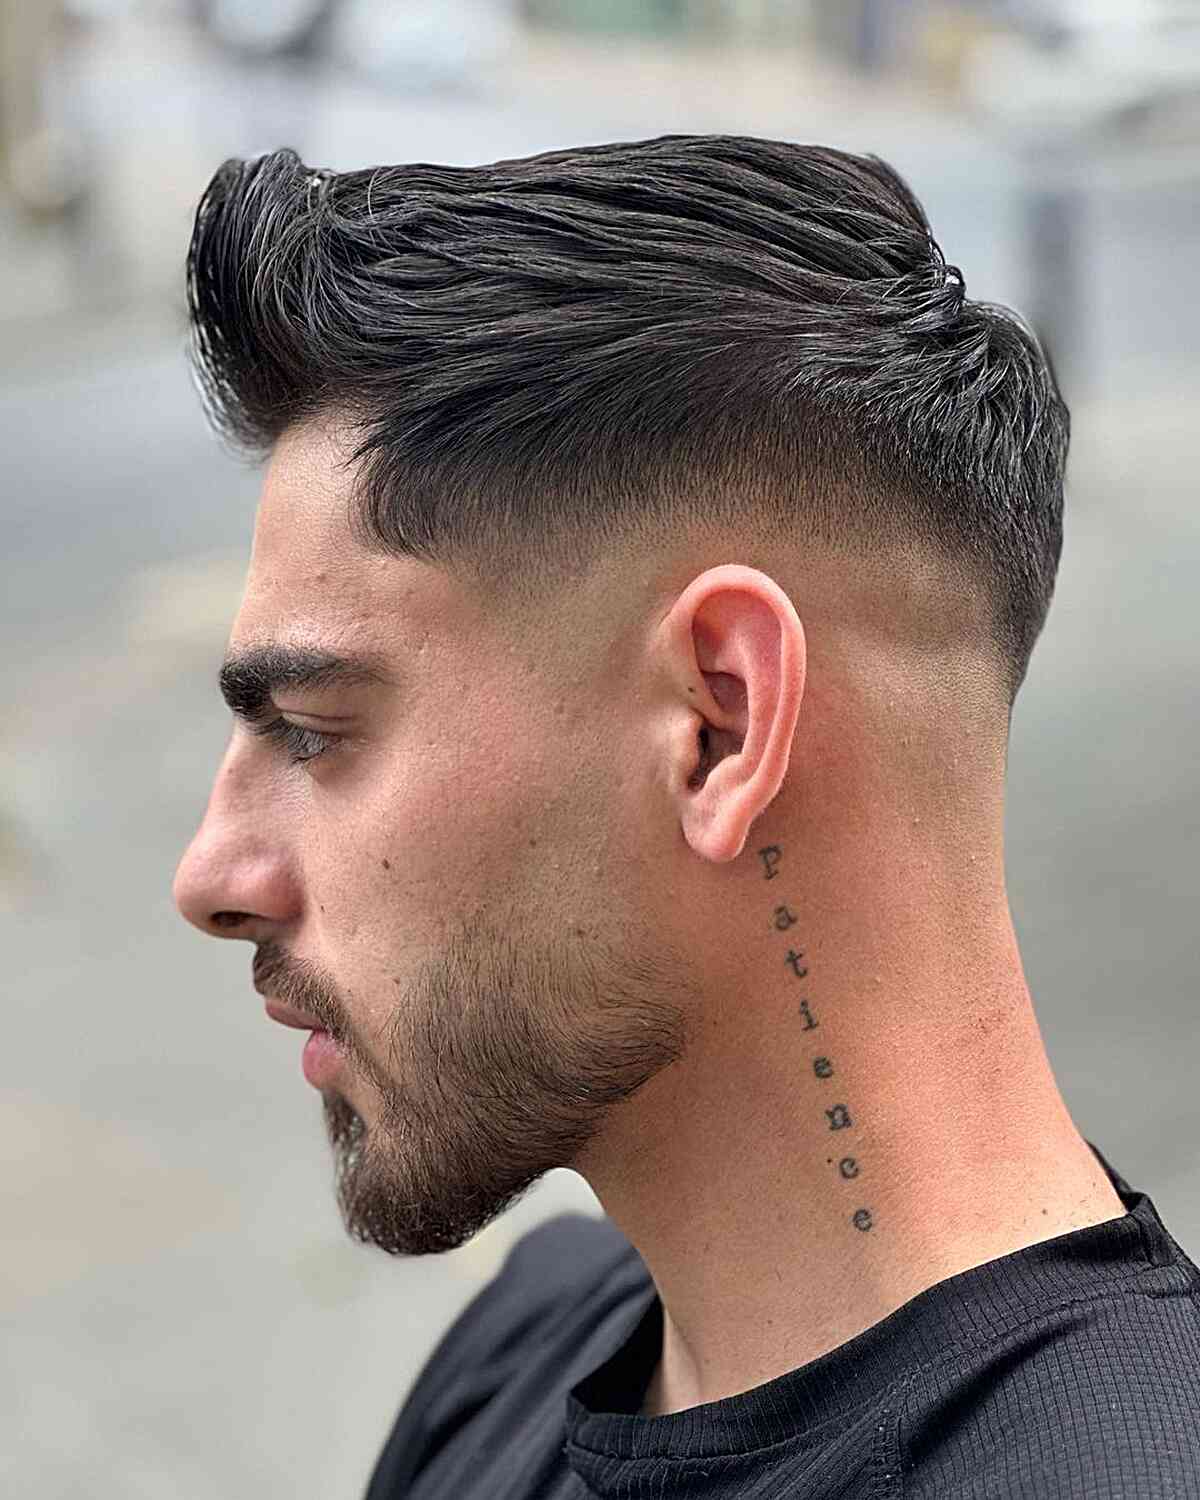 Undercut hairstyle a hot new look for guys – Reading Eagle